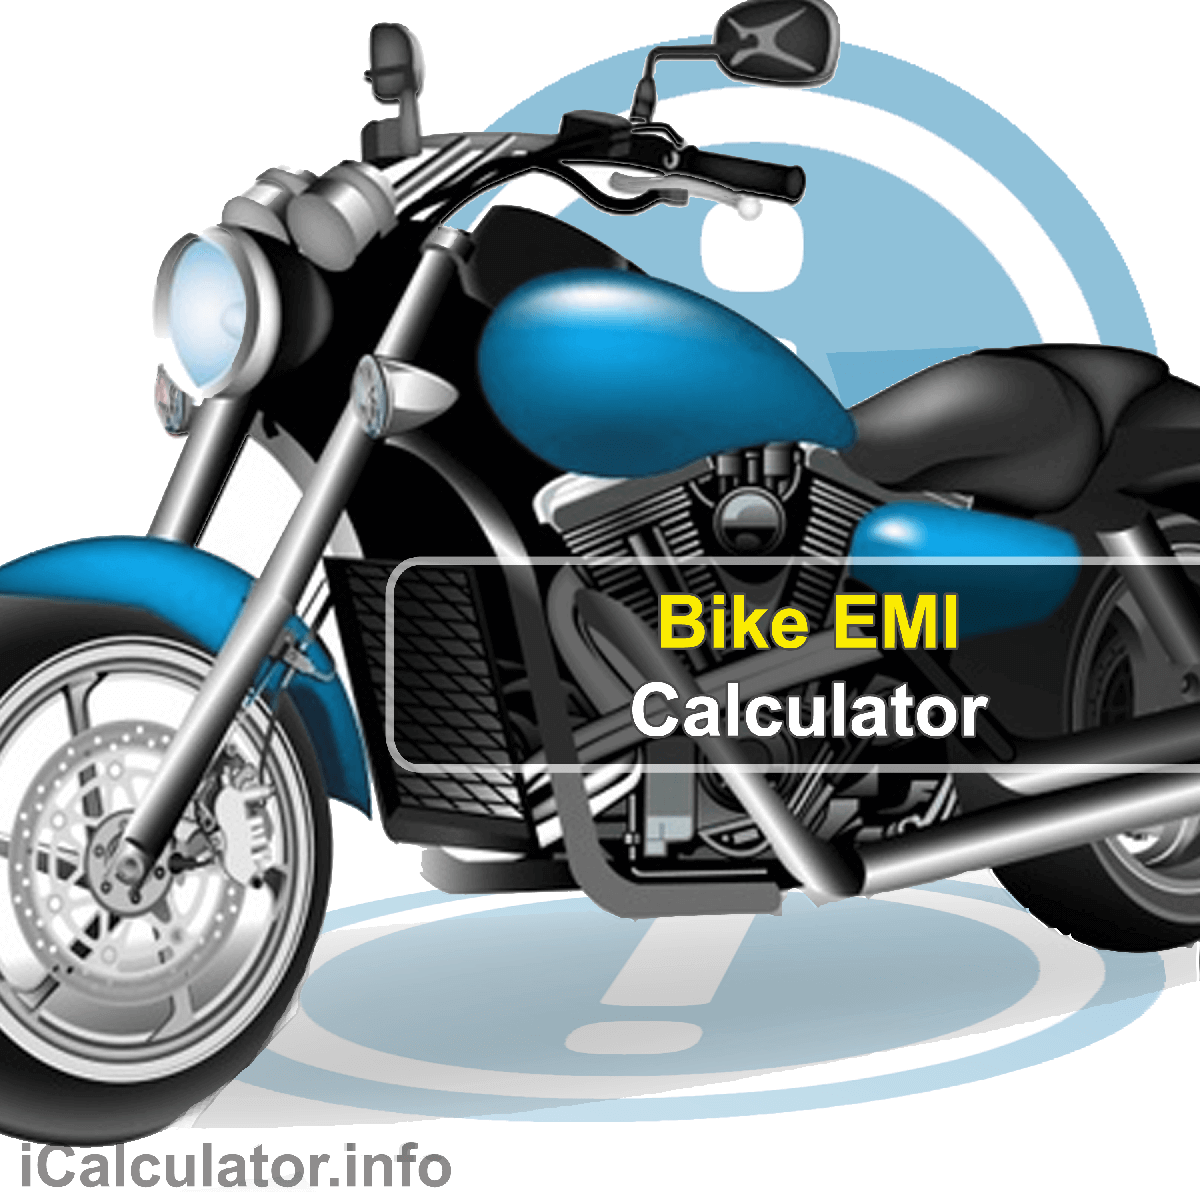 Bike EMI Calculator. This image provides details of how to calculate Bike EMI using a calculator and notepad. By using the EMI formula, the Bike EMI Calculator provides a true calculation of the monthly repayments on a bike loan for your new motorbike.